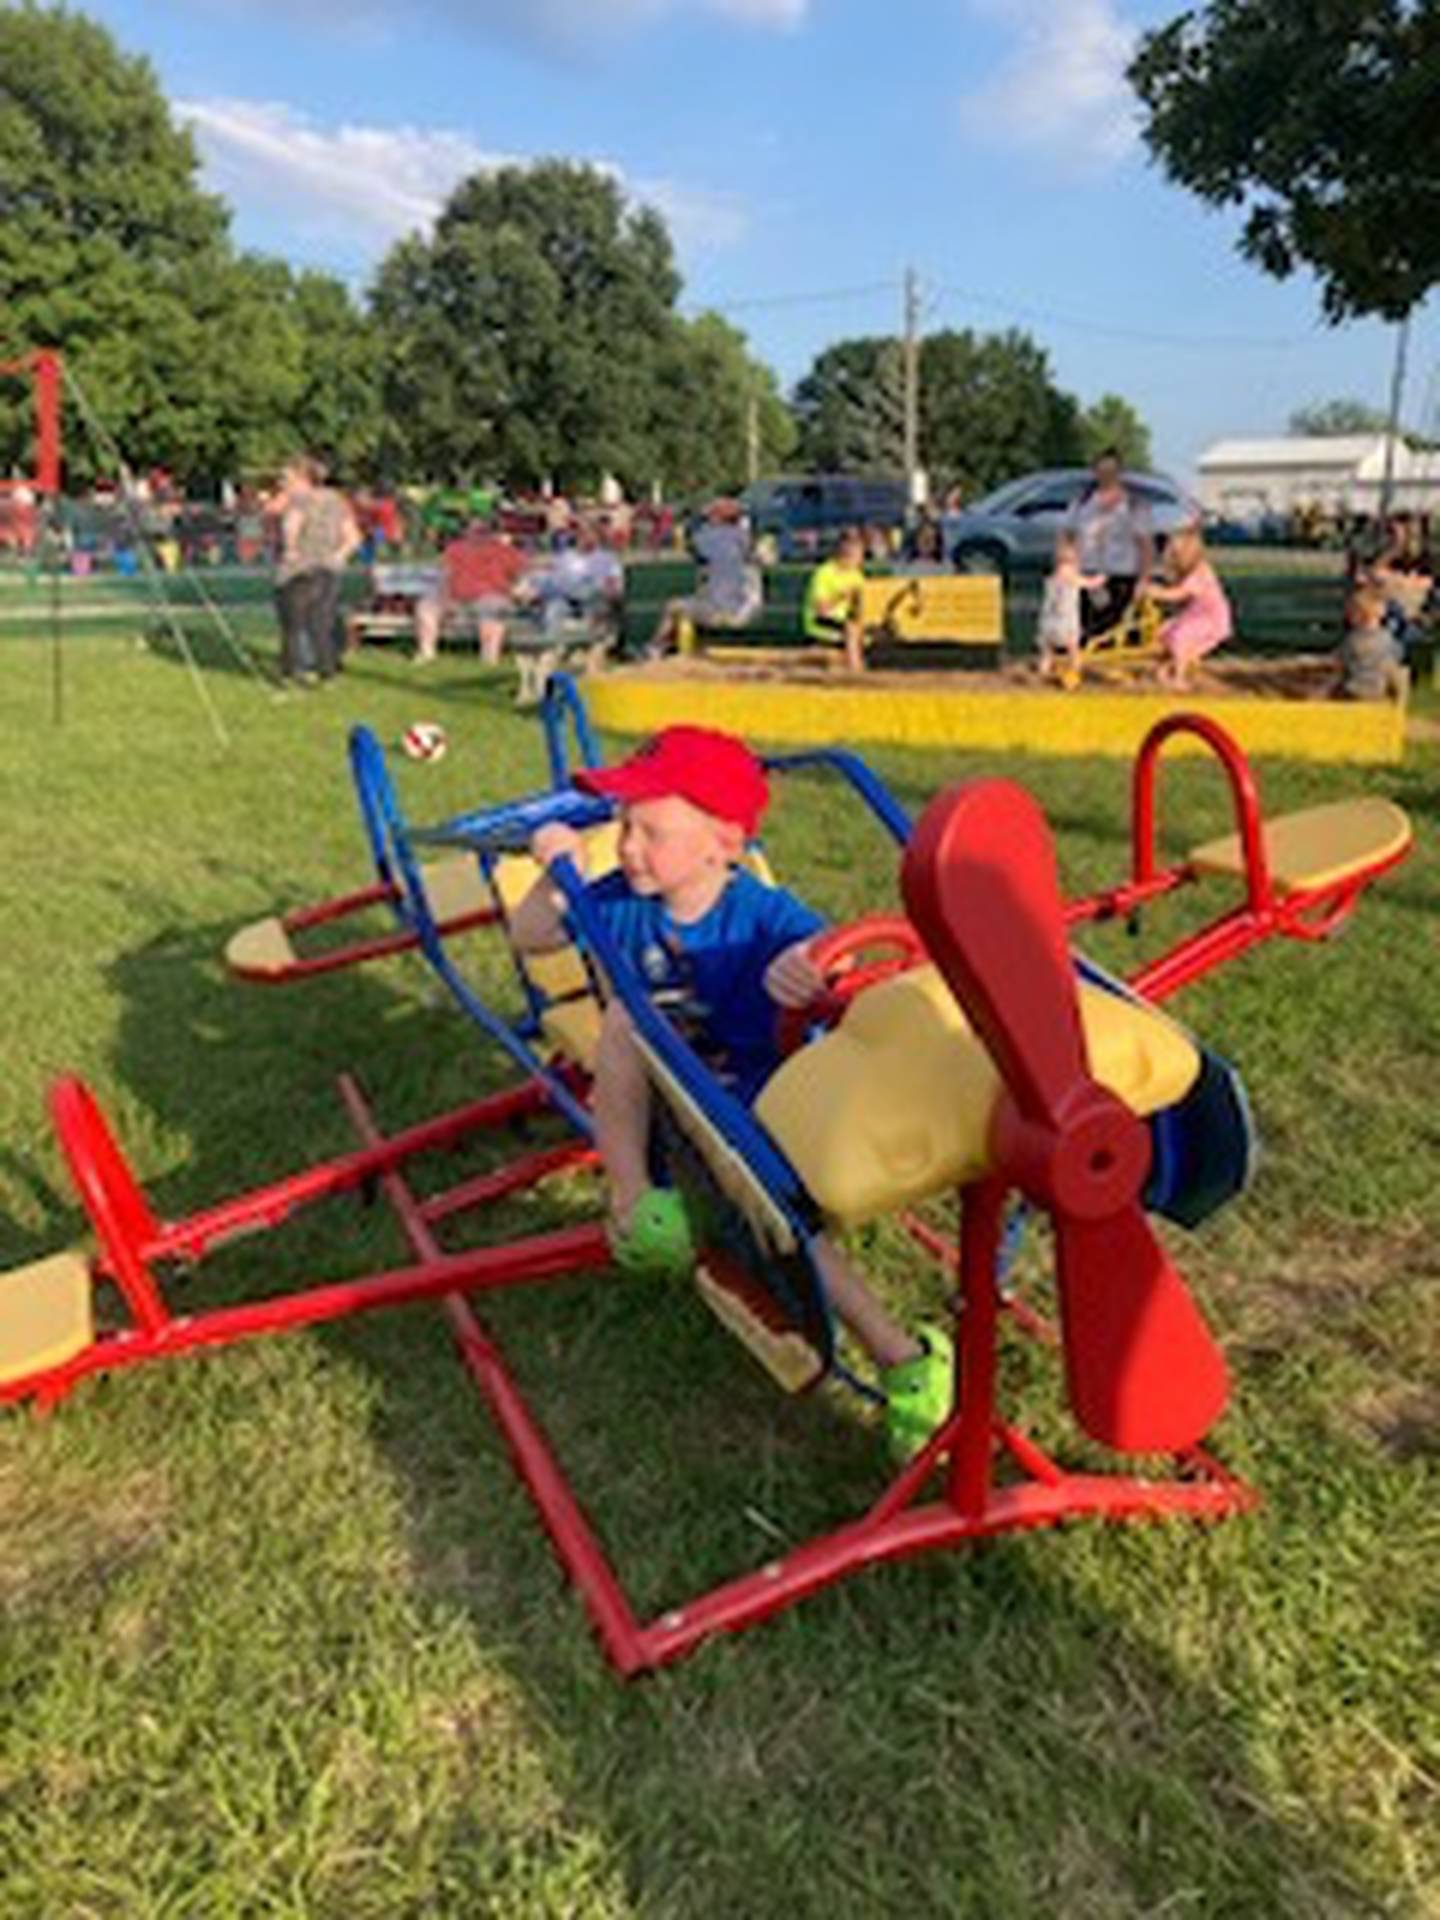 Levi Stutzman, son of Barry and Barby Stutzman, of Minonk, enjoys the crop duster airplane.